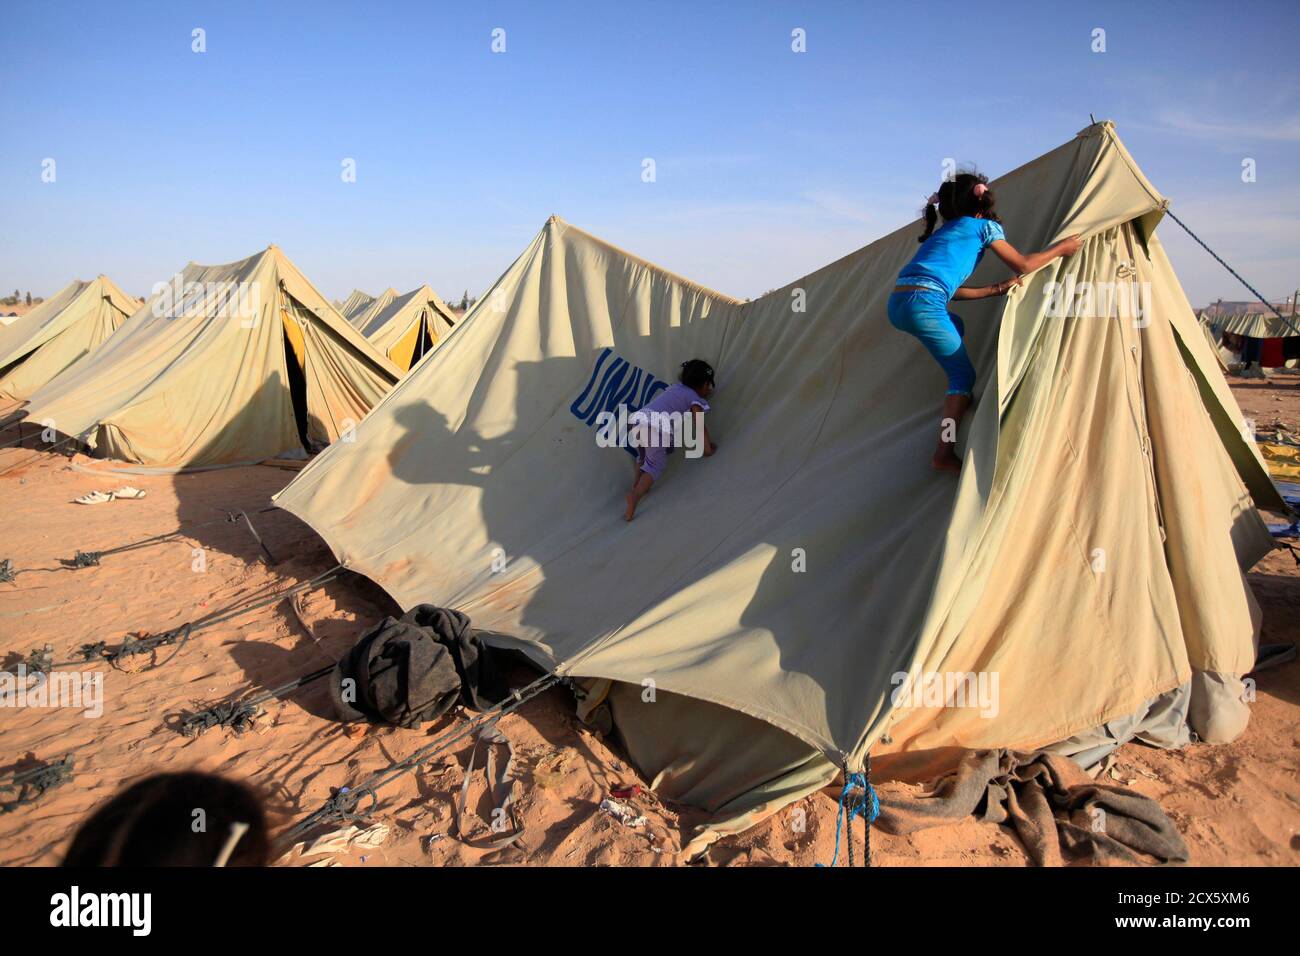 Libyan refugees who fled unrest in Libya climb their tent at a refugee camp near the southern Libyan and Tunisian border crossing of Dehiba May 8, 2011. REUTERS/Zohra Bensemra (TUNISIA - Tags: POLITICS CIVIL UNREST IMAGES OF THE DAY CONFLICT SOCIETY) Stock Photo